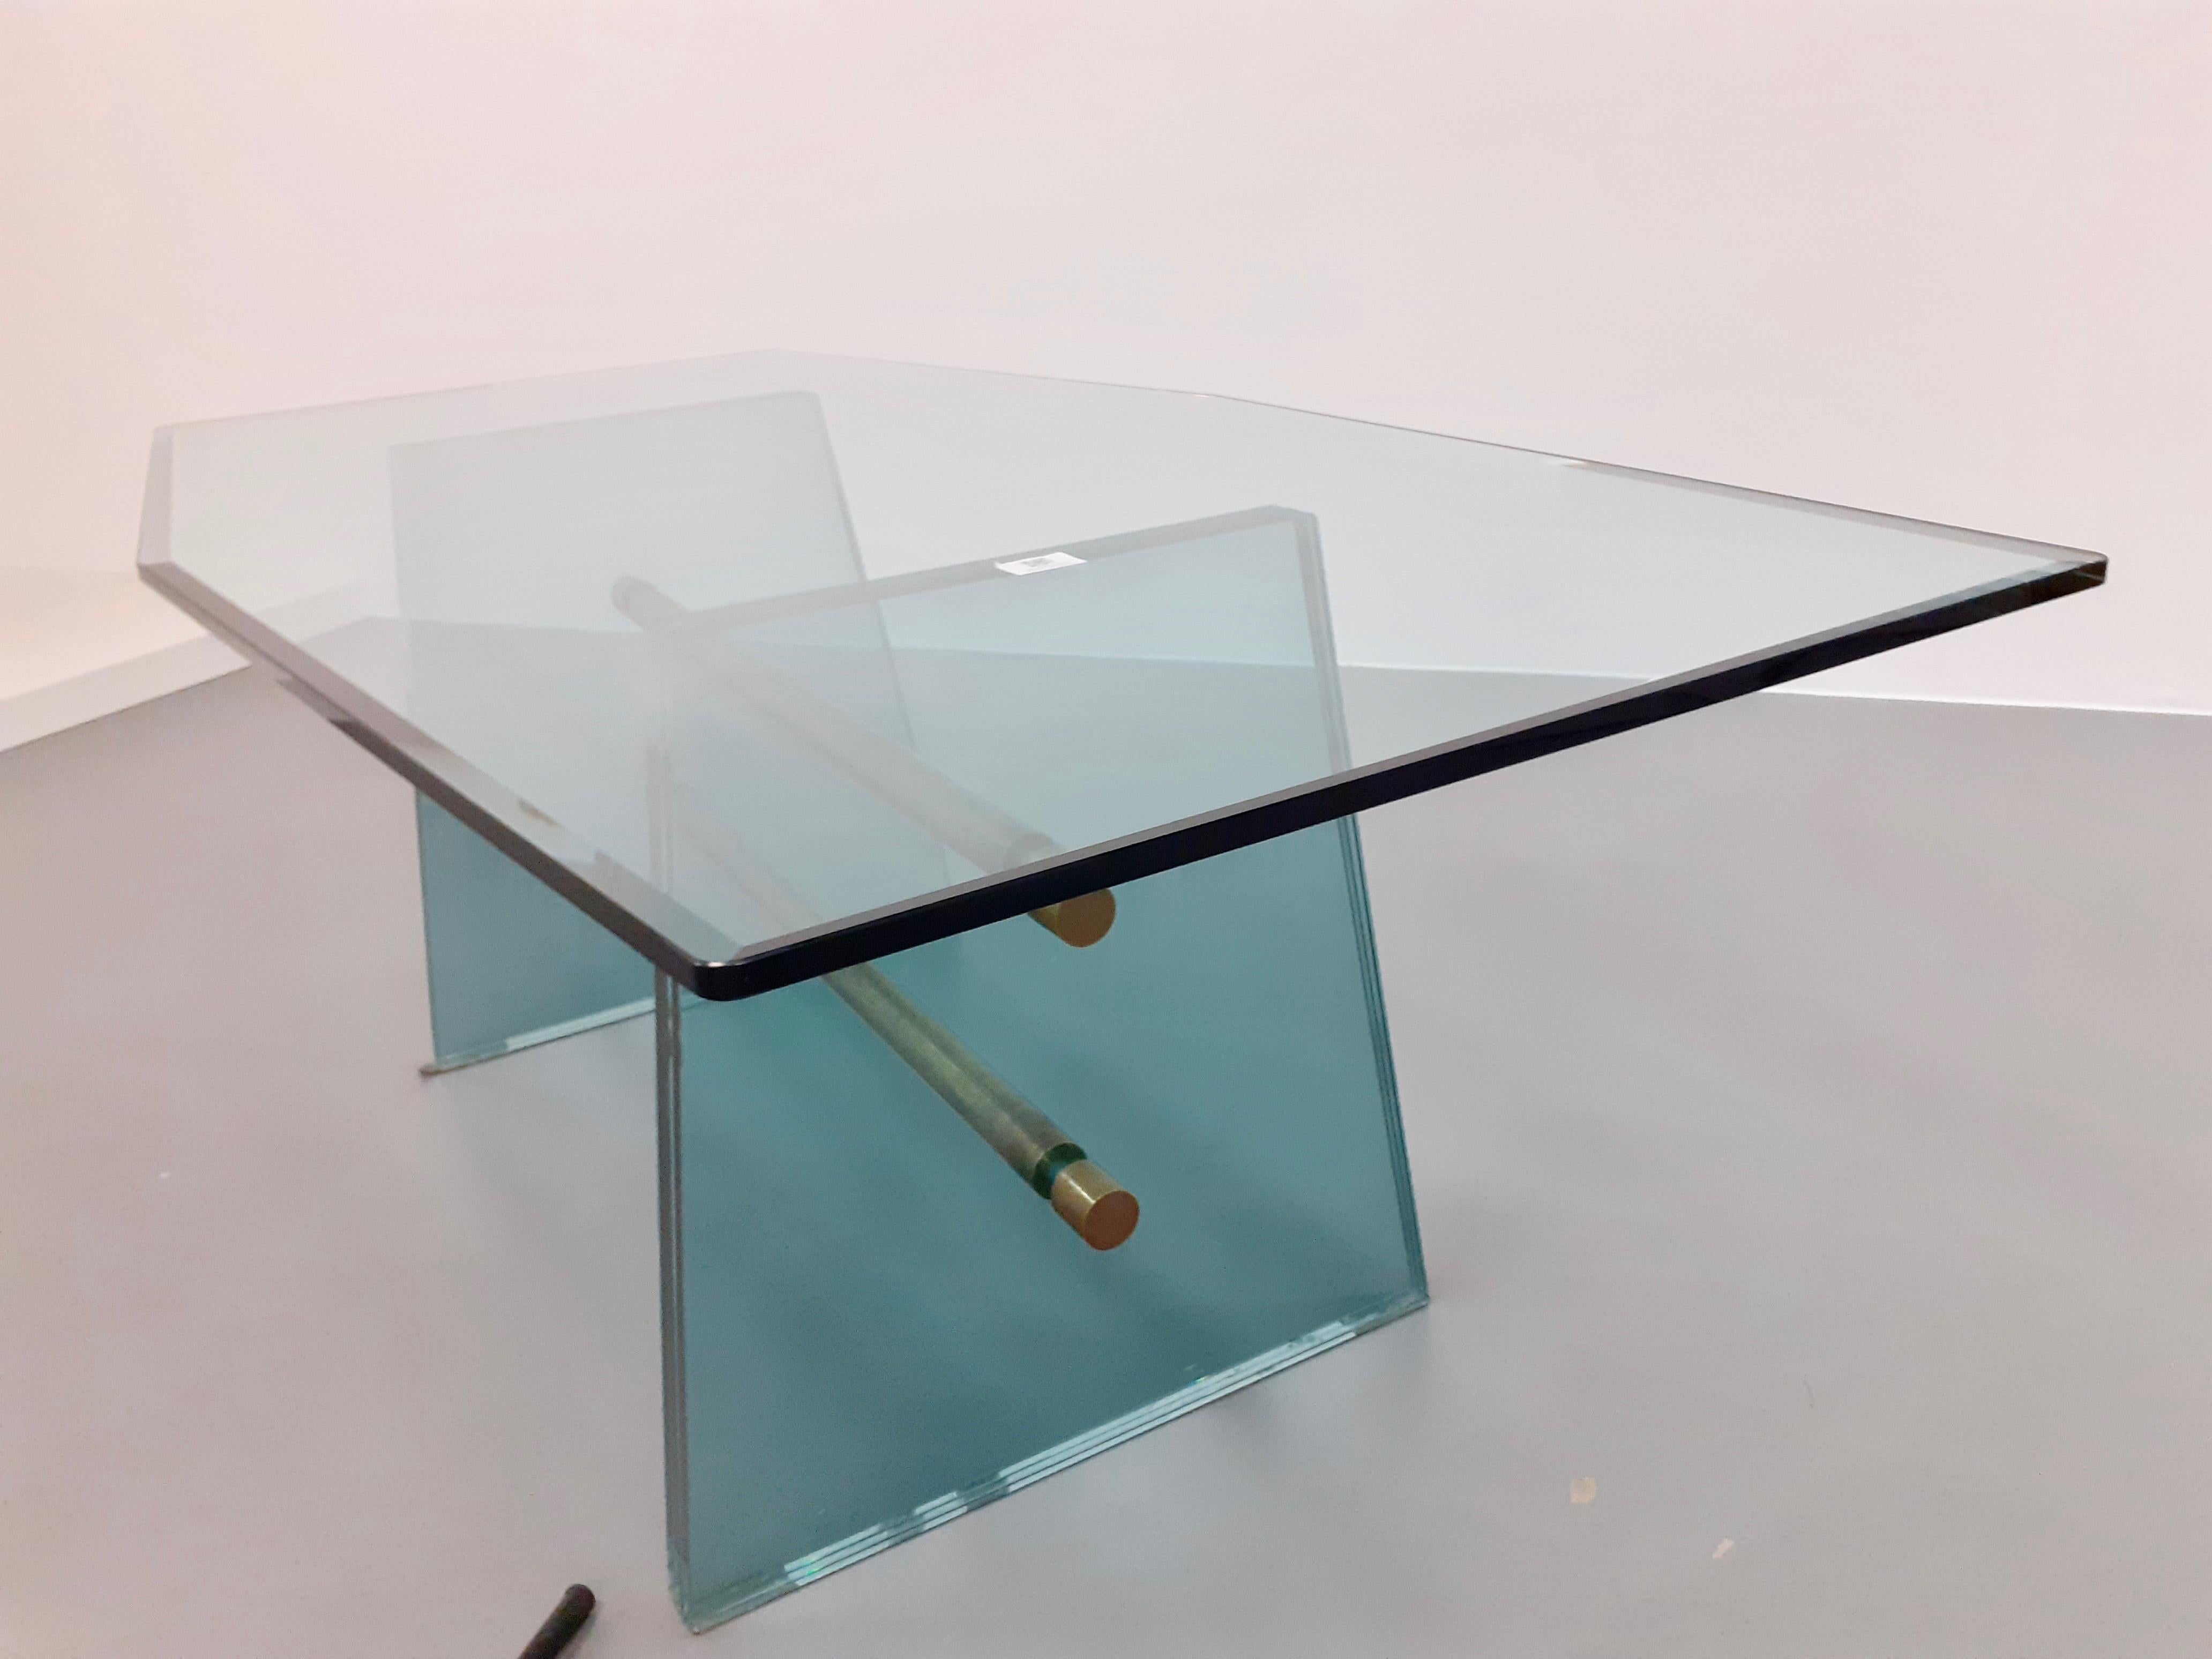 Large glass dining table designed by Pietro Chiesa and manufactured by Fontana Arte, Milano, circa 1940
extremely rare and important monumental dining table
cut shaped top, massive and thick glass, two large nickeled brass central beam
three